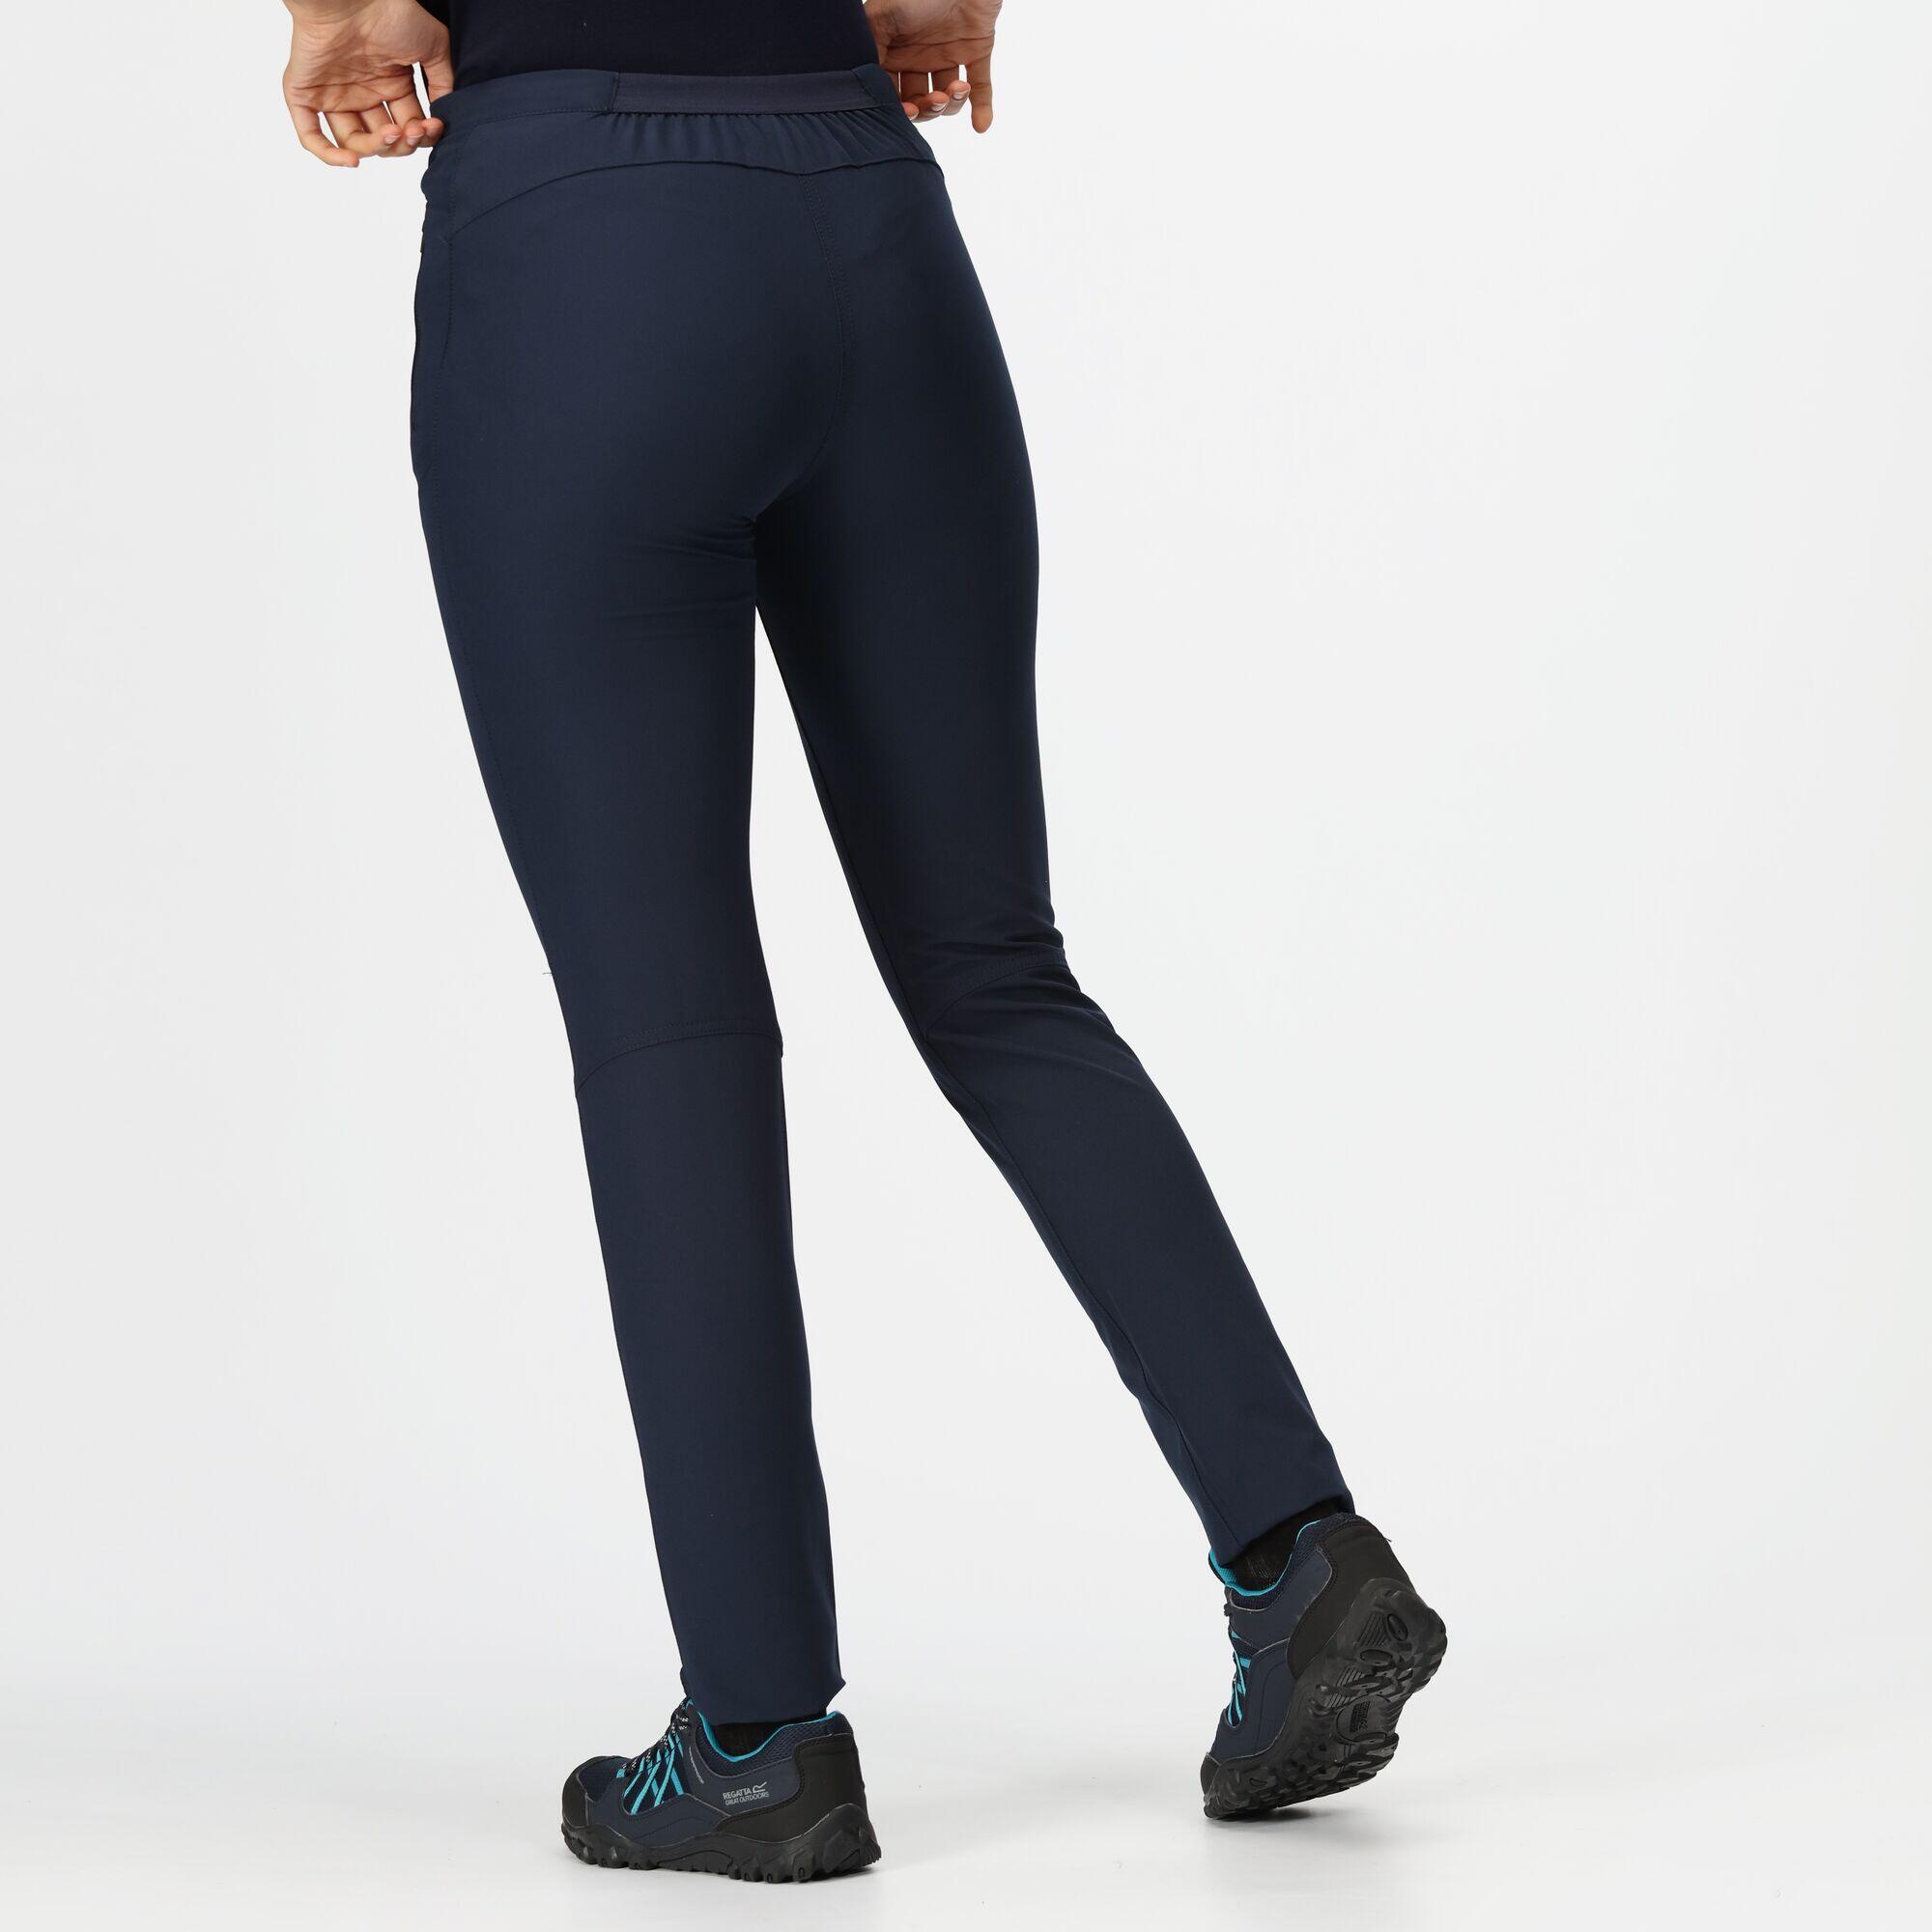 Pentre Stretch Women's Hiking Trousers - Navy 2/5